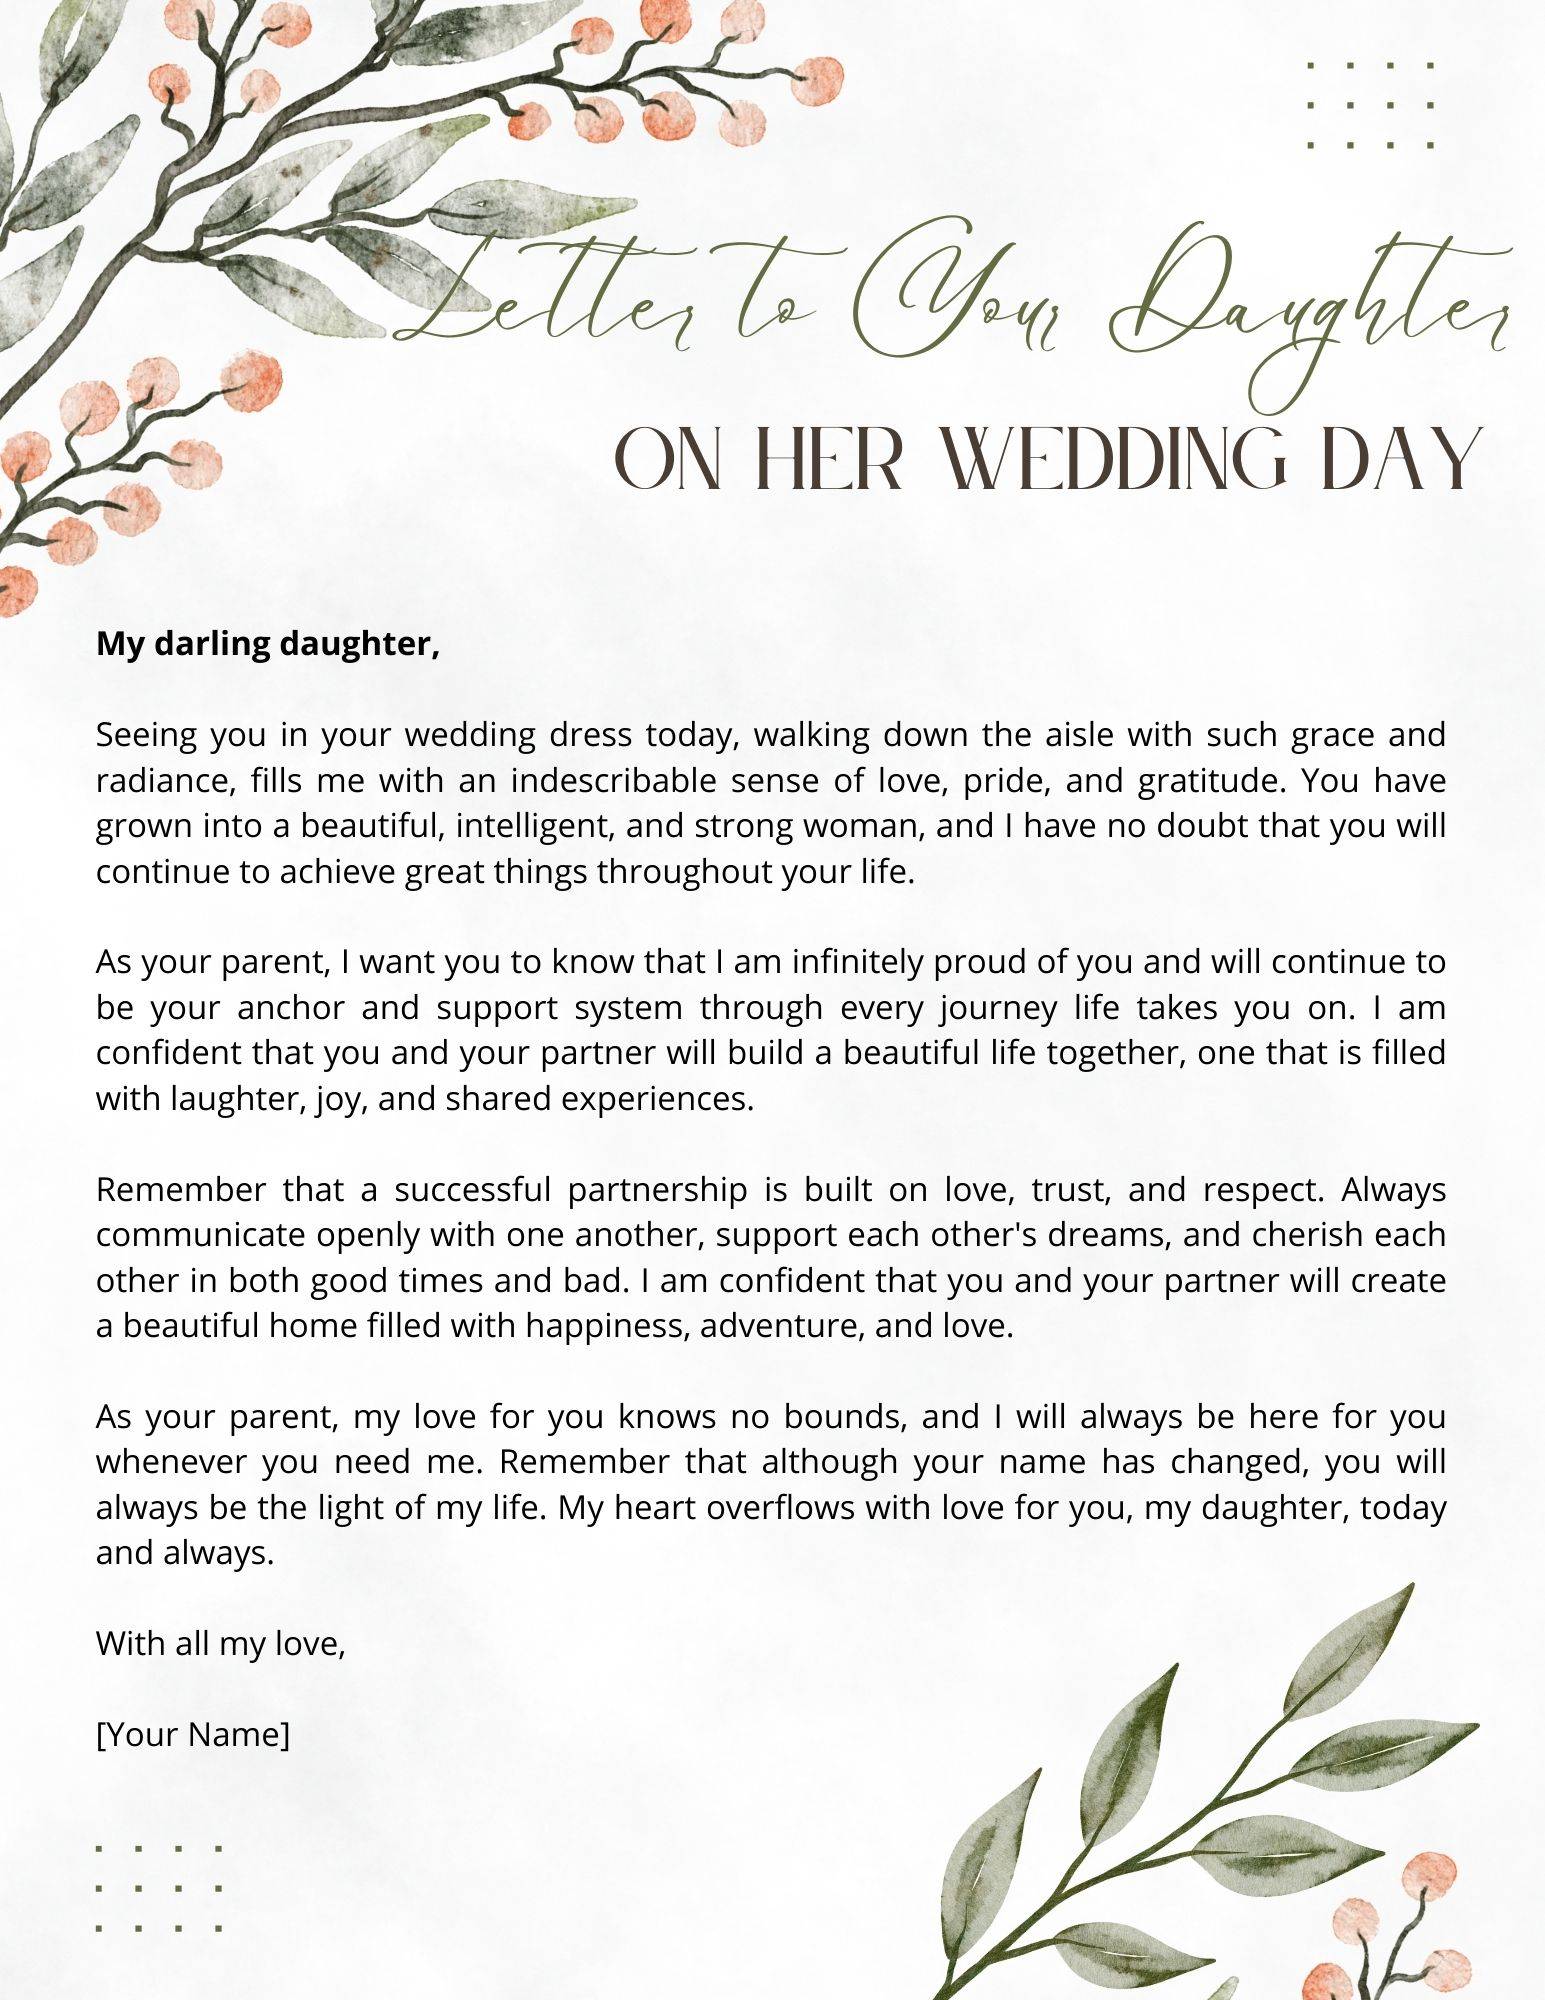 Wedding Letter to Your Daughter Example